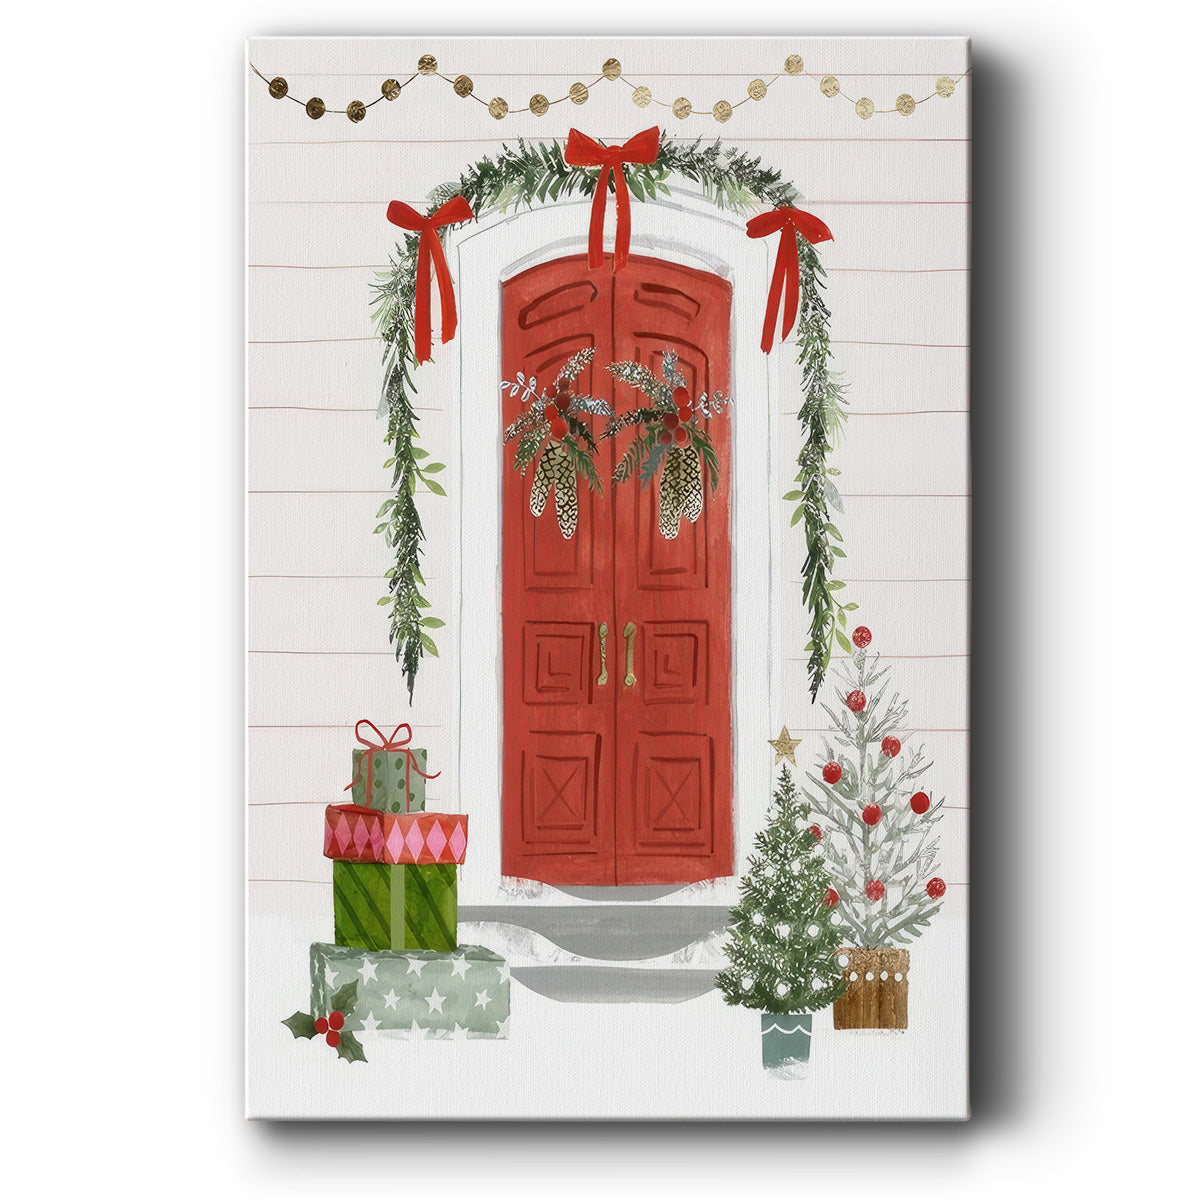 Festive Front Door II - Gallery Wrapped Canvas